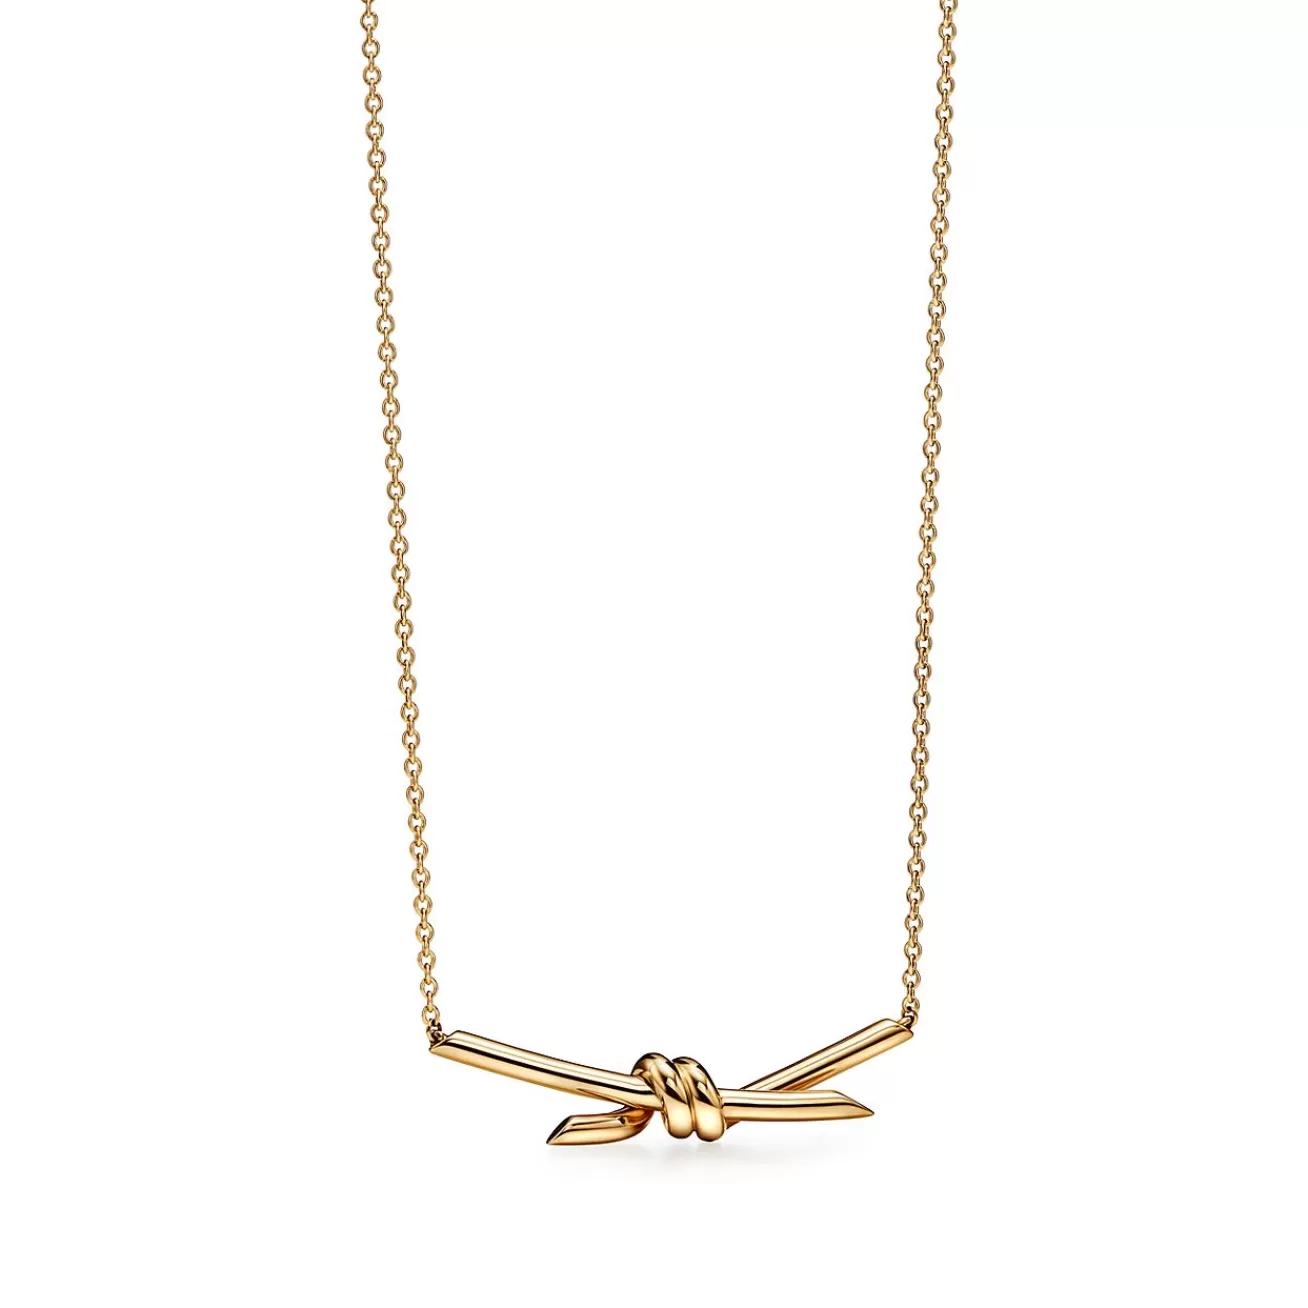 Tiffany & Co. Tiffany Knot Pendant in Yellow Gold | ^ Necklaces & Pendants | Men's Jewelry